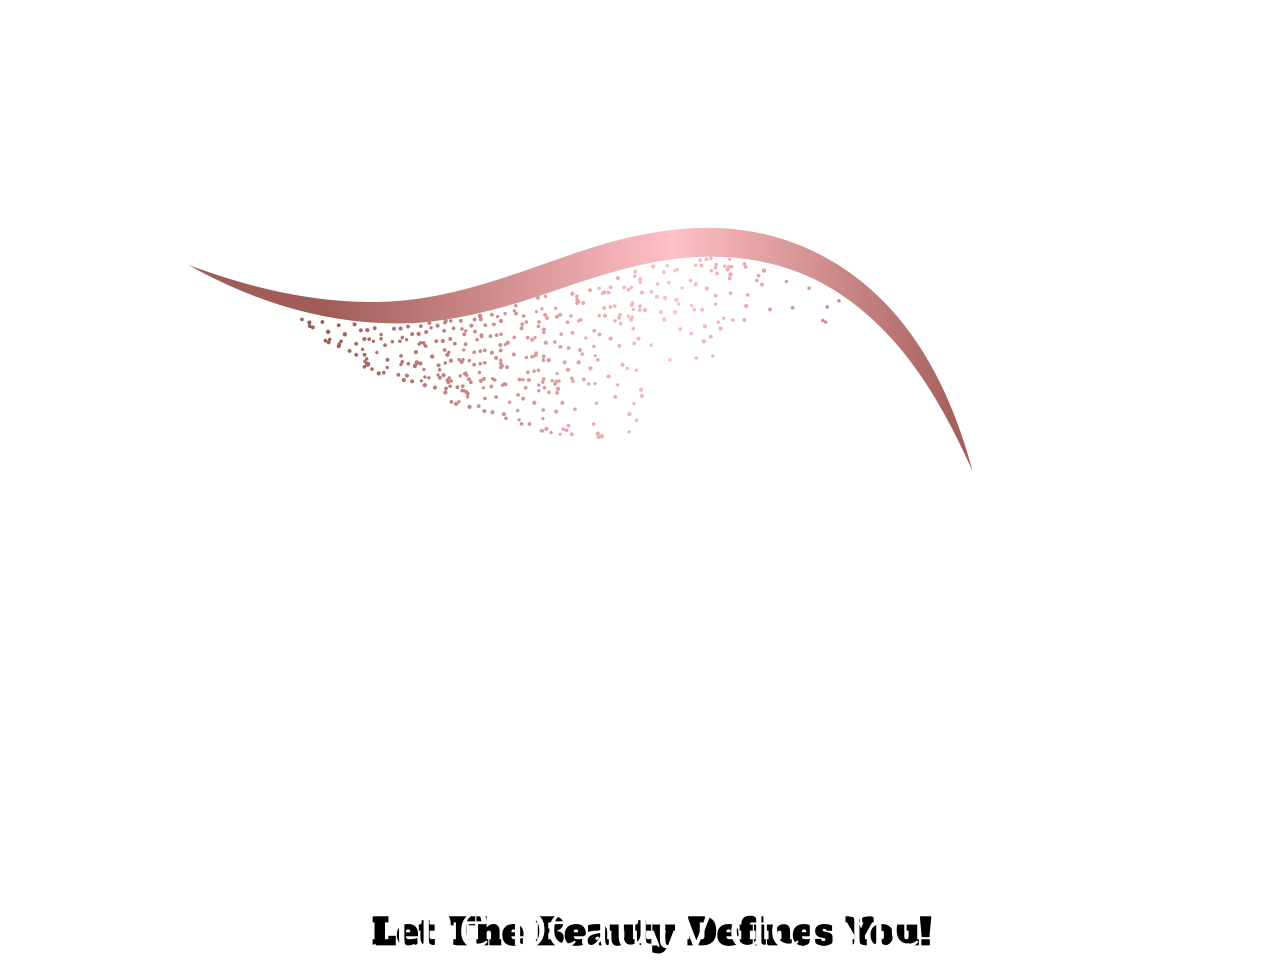 Bambie’s Glamour's web page